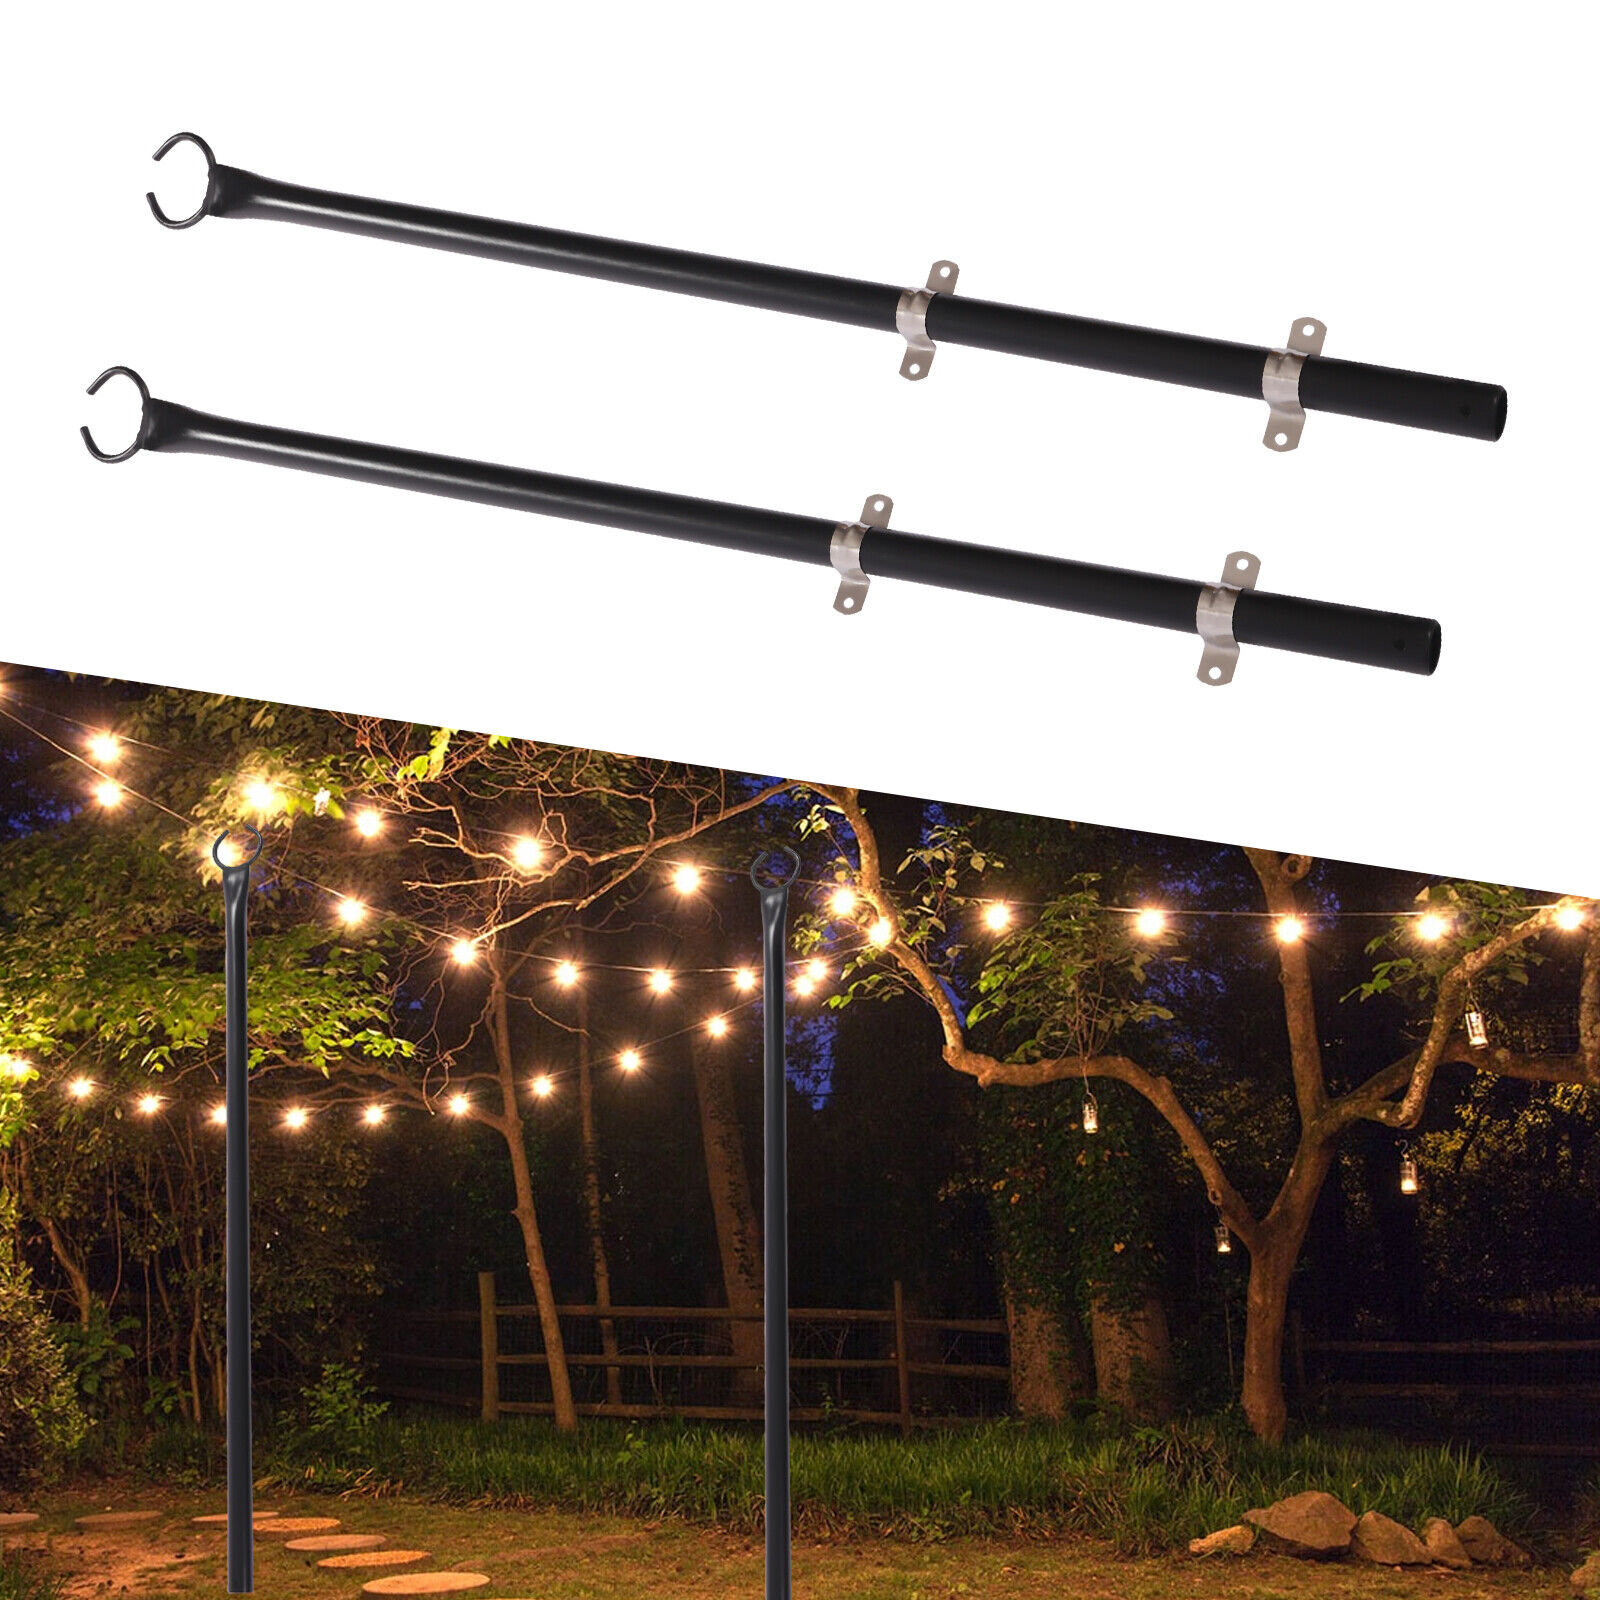 Miumaeov String Light Poles Light Pole Stand for Deck Fence or Patio  Railing Light Post for Hanging Outside Decorate Lighting for Parties Wedding  Camping Pack 8ft with Prong Forks